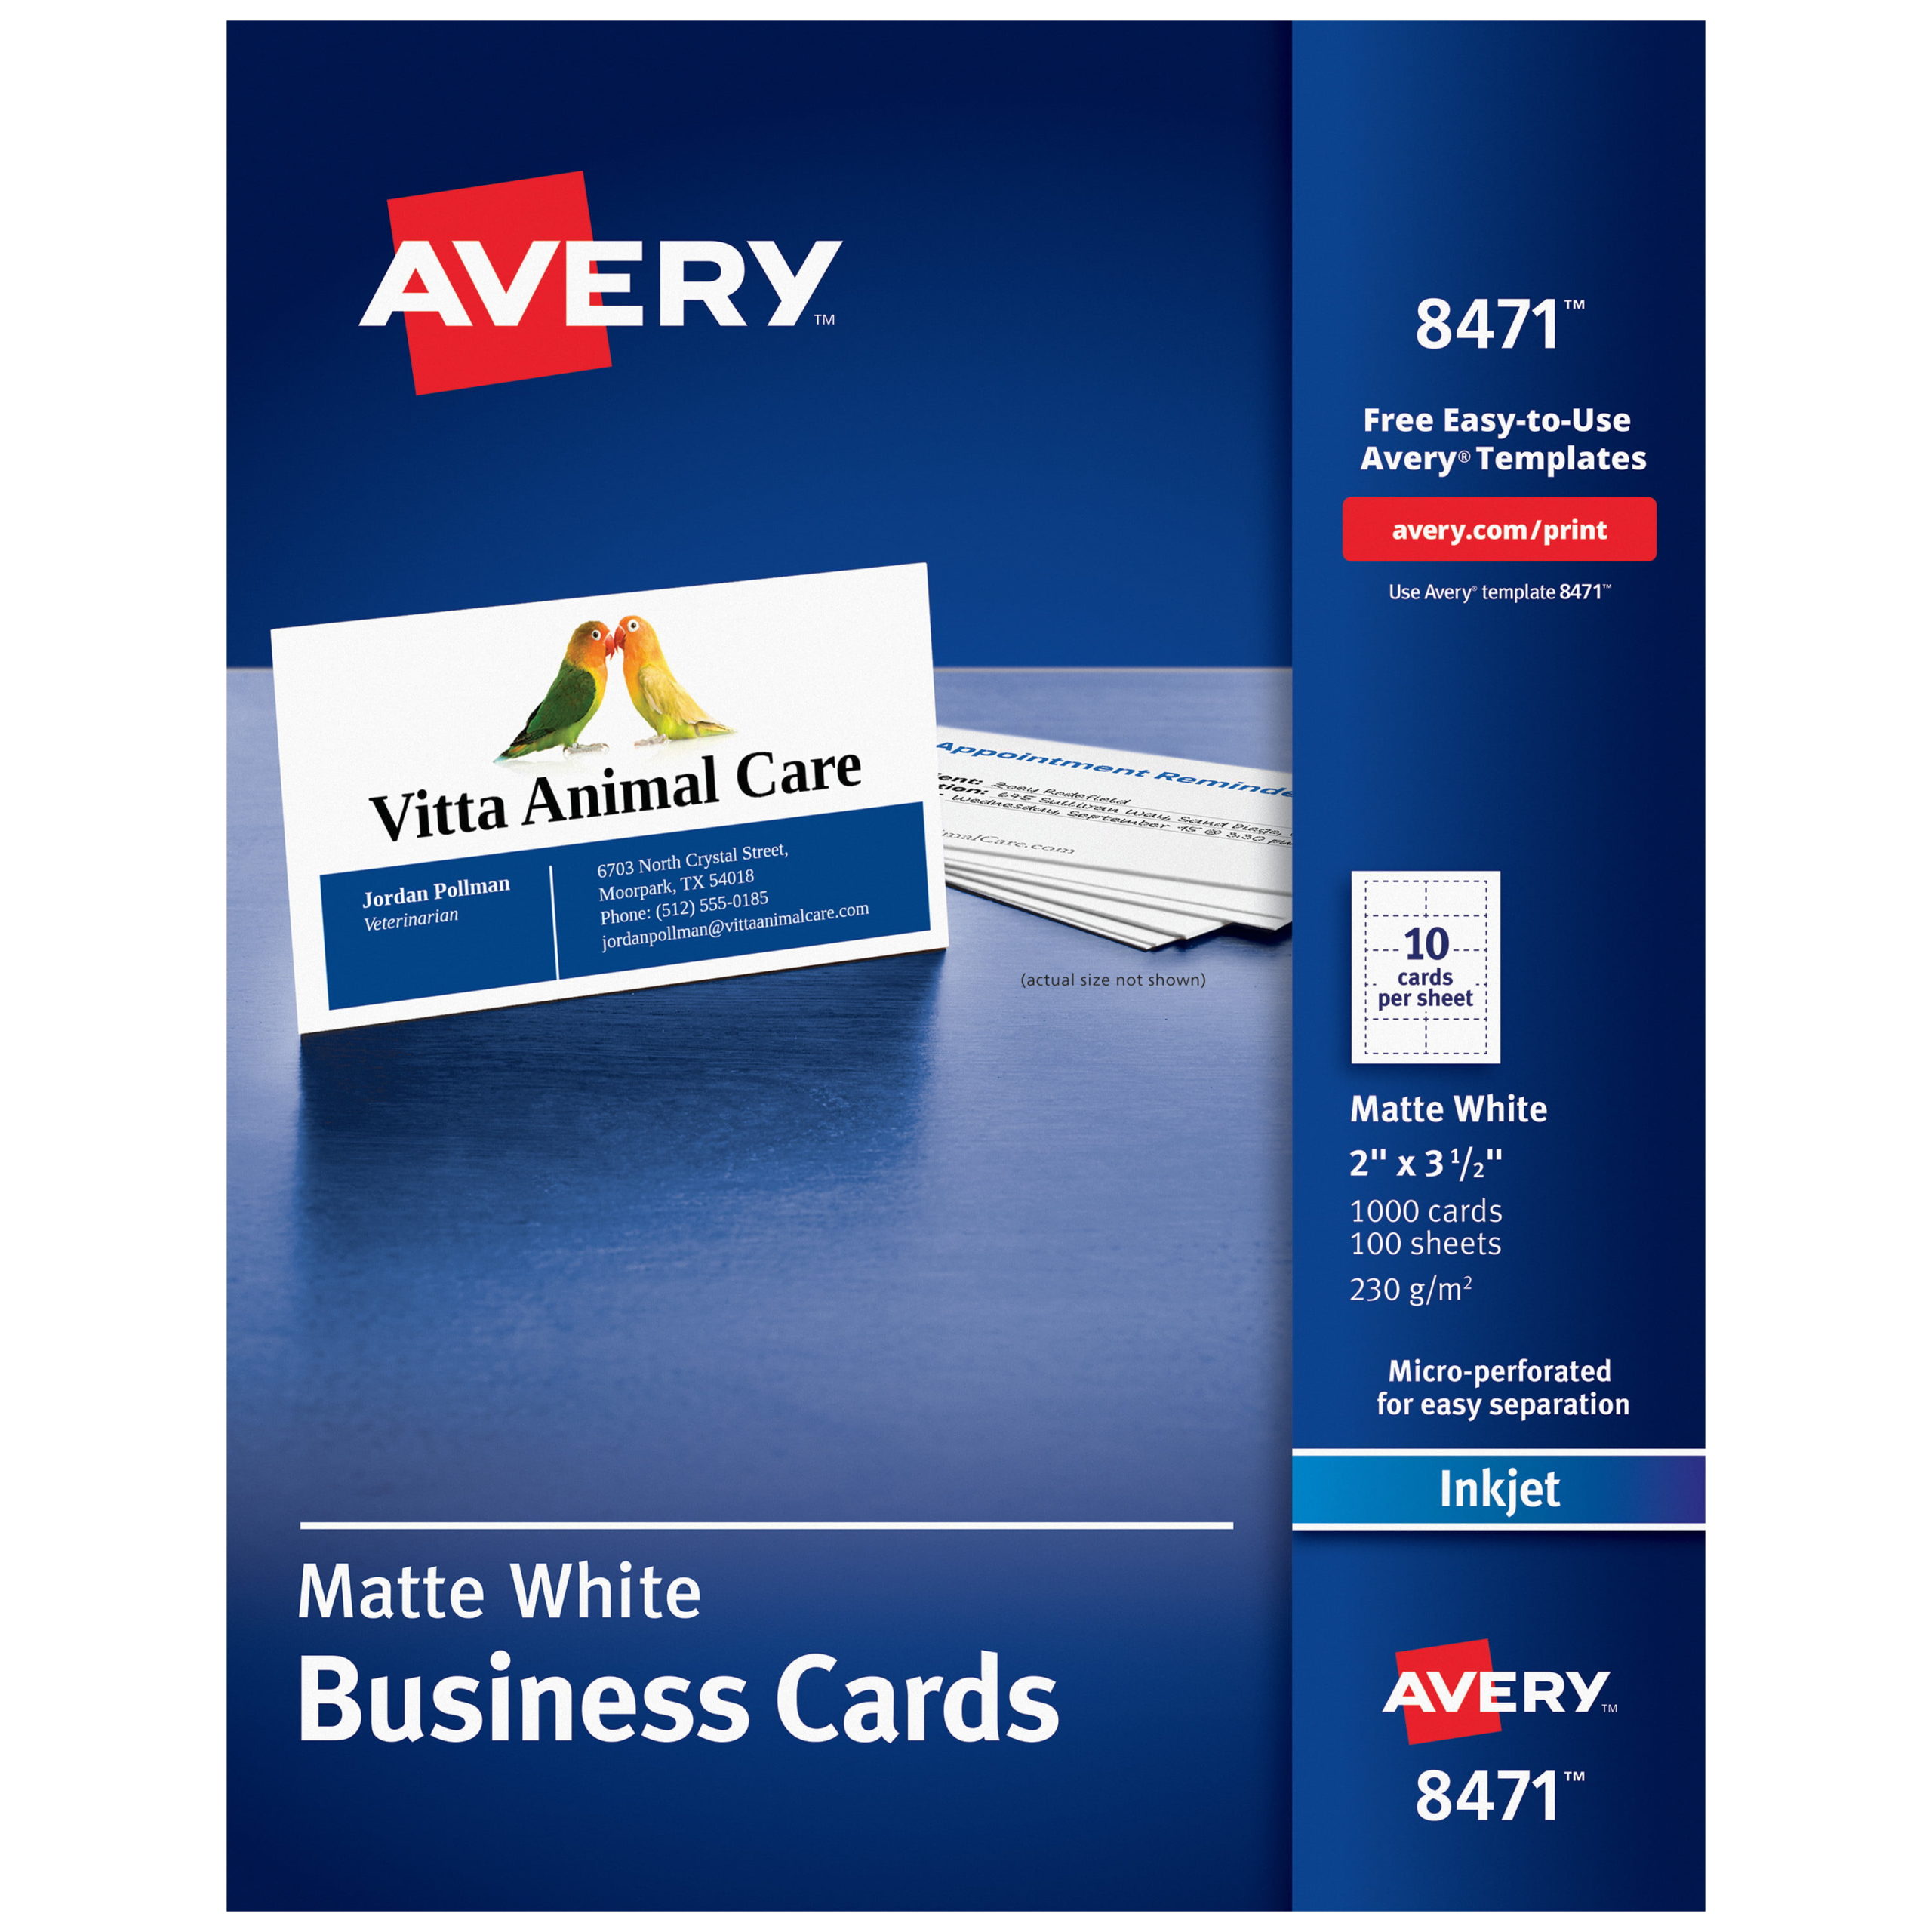 avery 5371 business cards 4